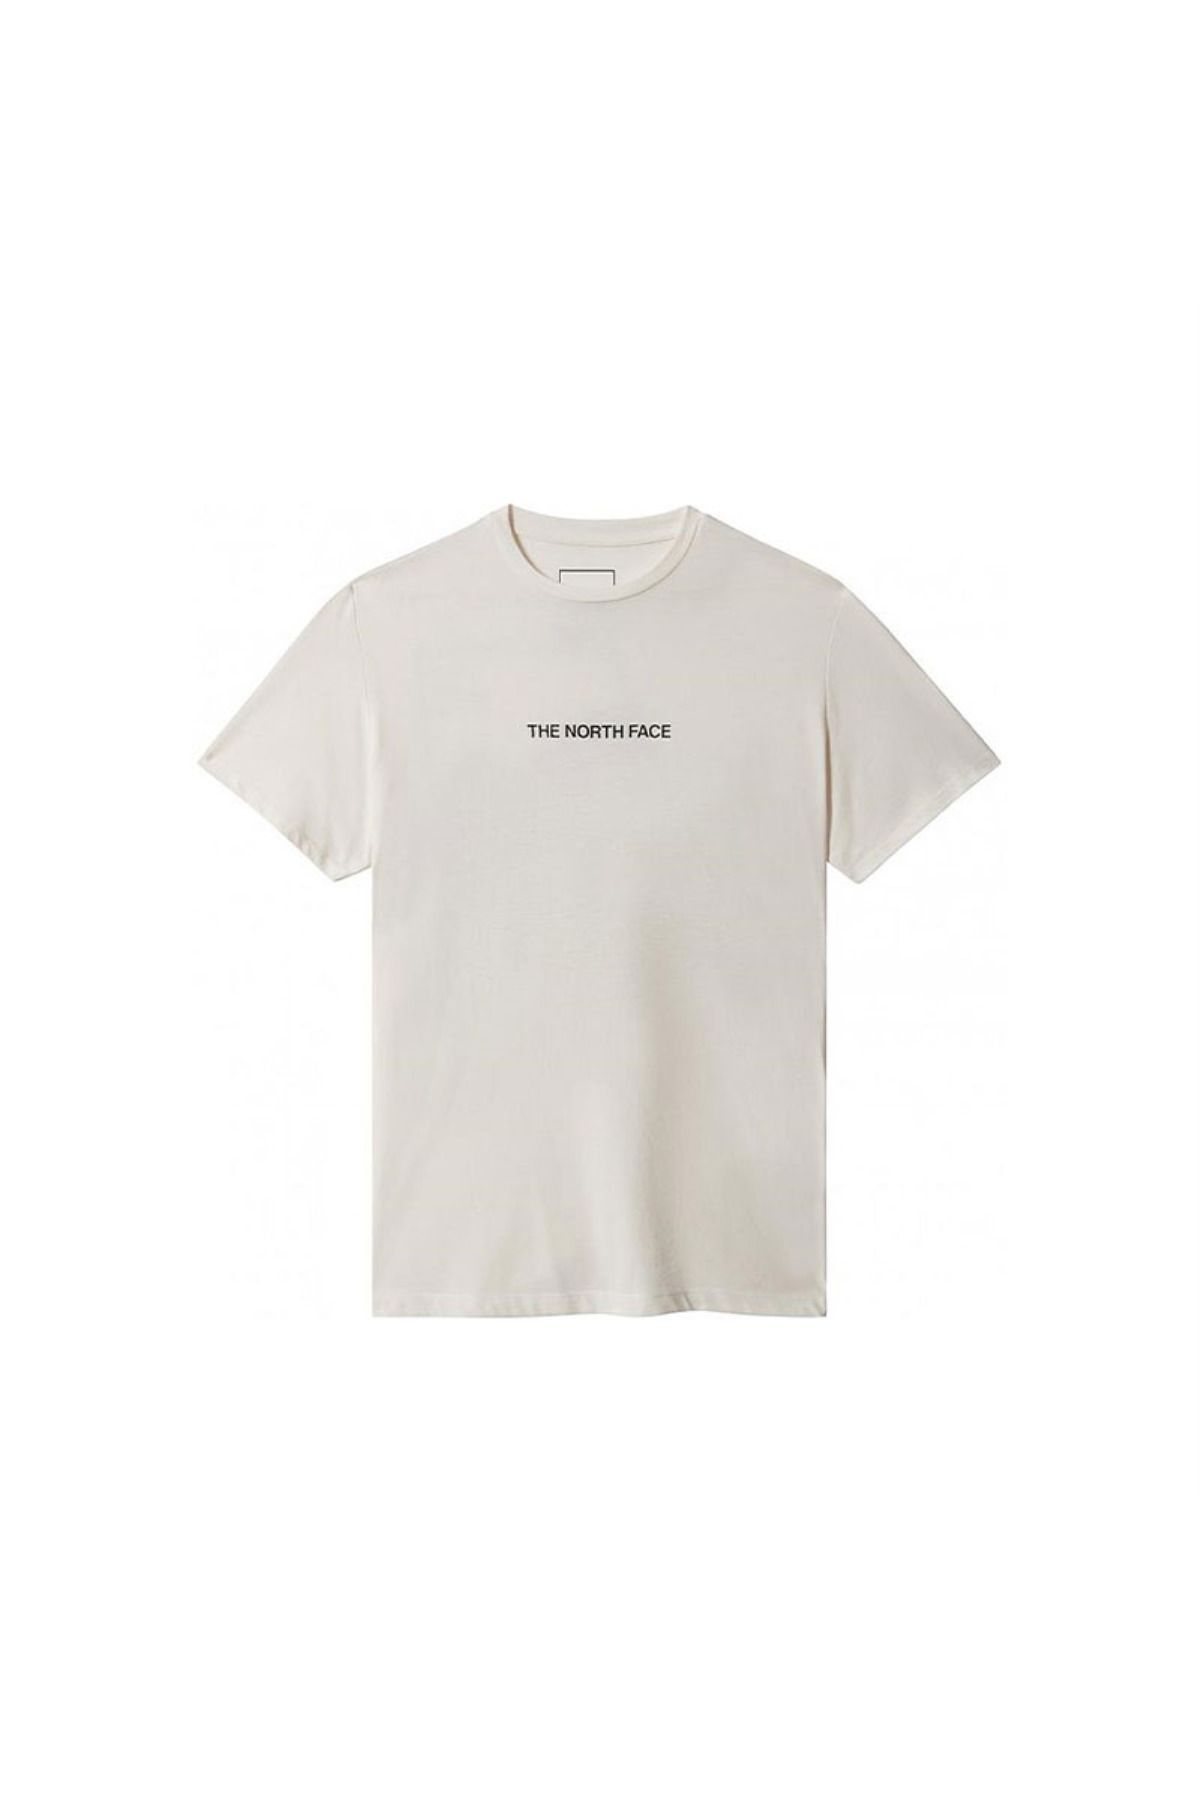 The North Face M Foundation Graphic Tee S/s